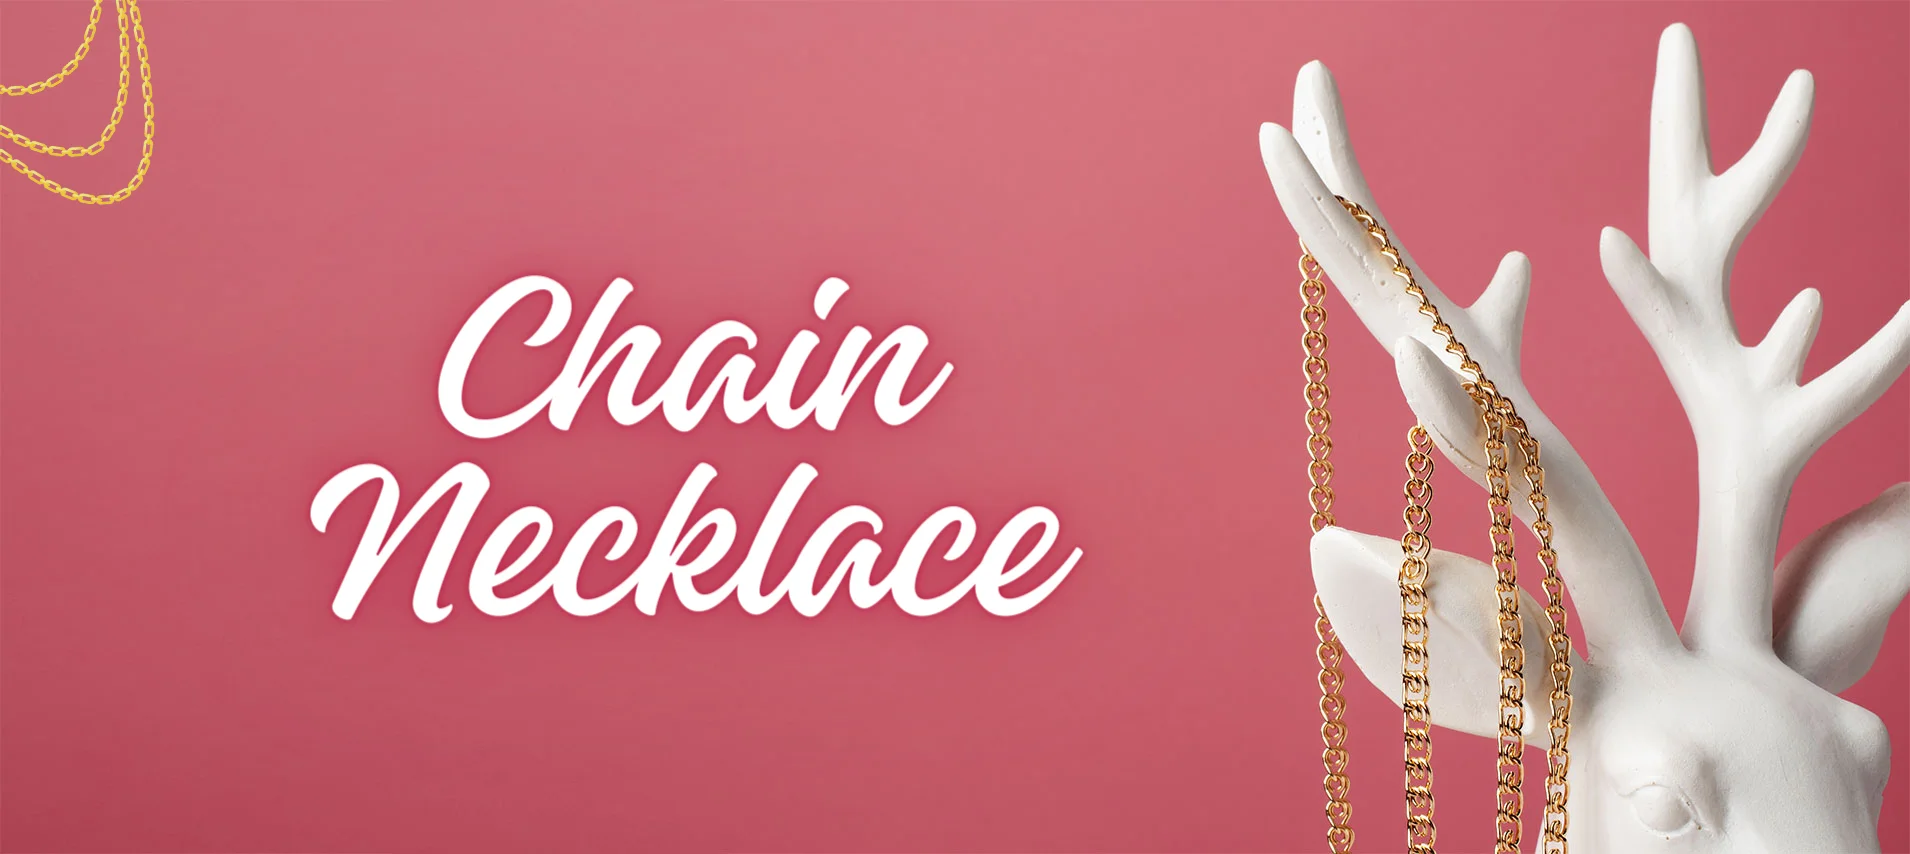 Chain Necklace For Women